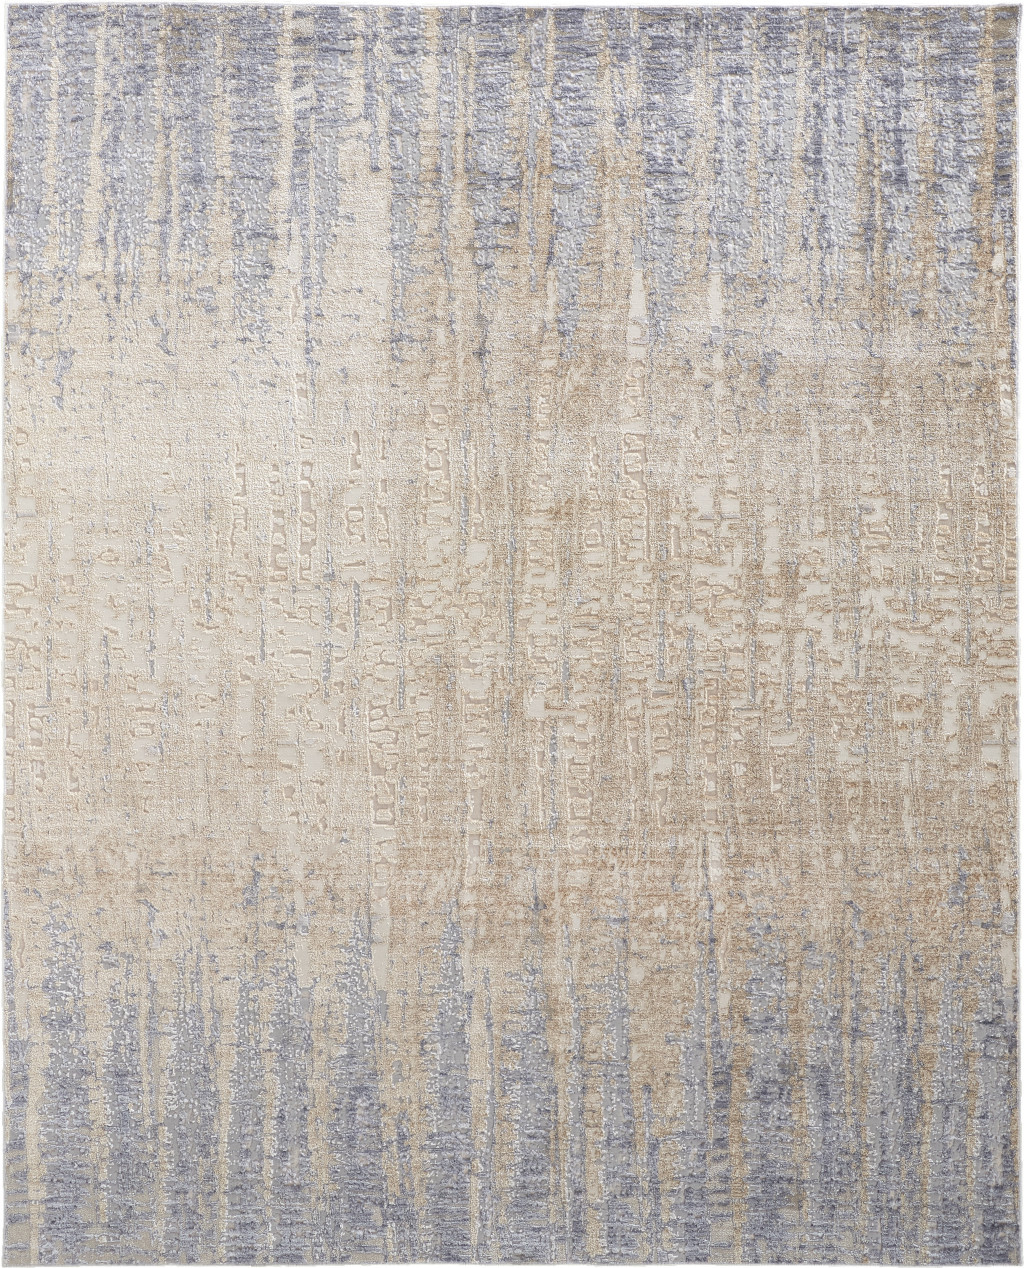 10' X 13' Tan Brown And Blue Abstract Power Loom Distressed Area Rug-514188-1